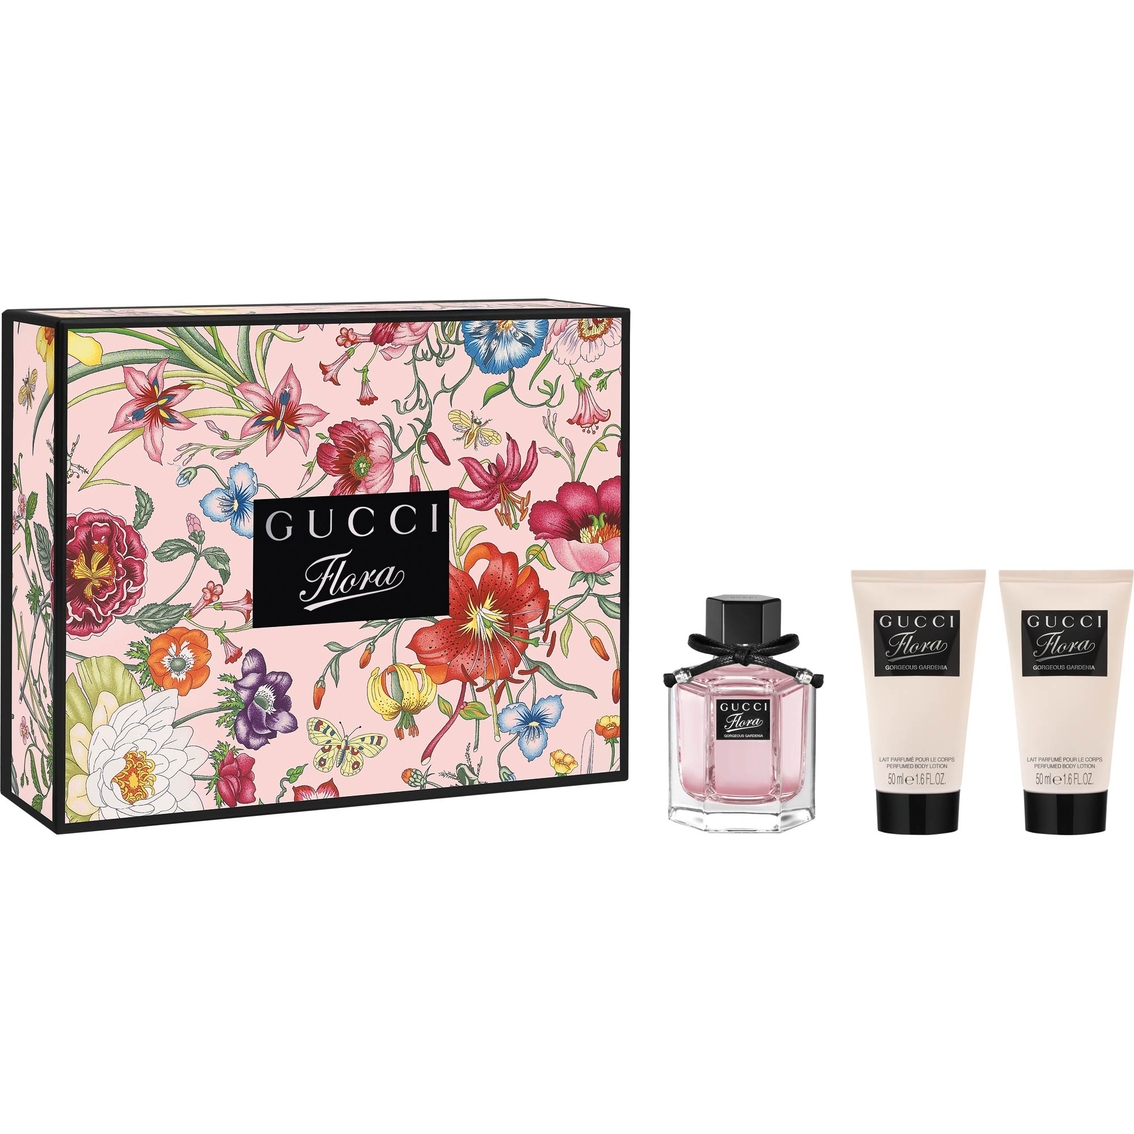 Gucci Gardenia Gift Set | Atg Archive | Shop The Exchange